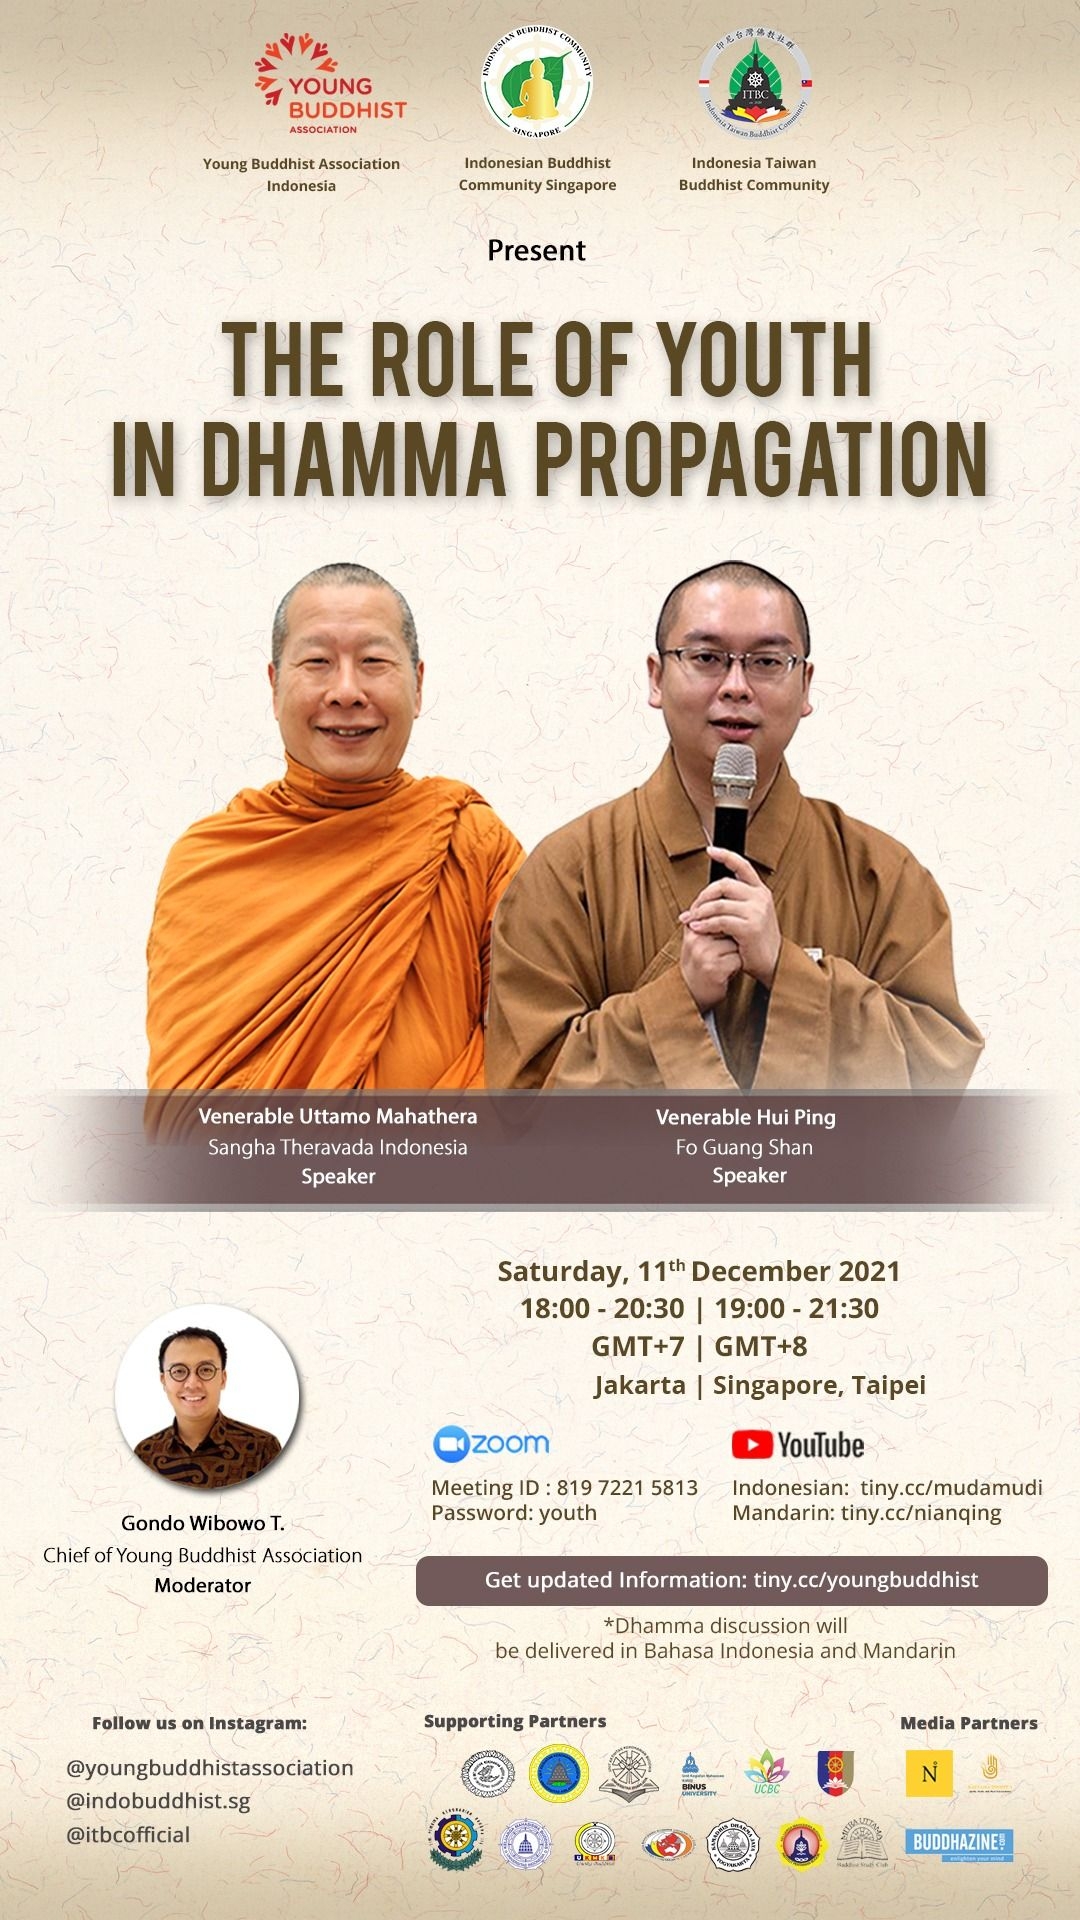 THE ROLE OF YOUTH IN DHAMMA PROPAGATION